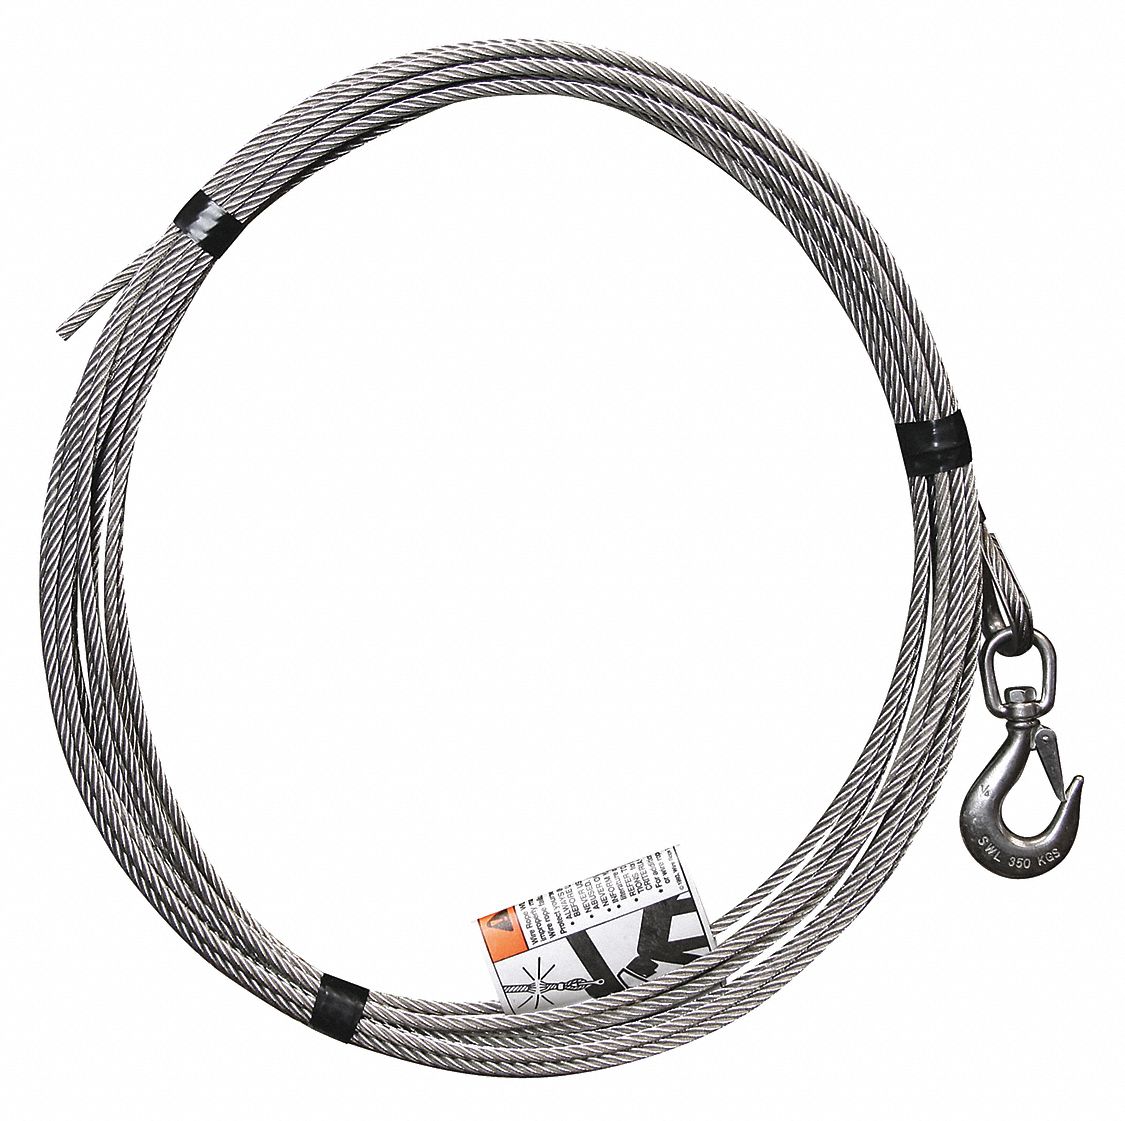 OZ LIFTING PRODUCTS WIRE ROPE CABLE ASSEMBLY INC SWIVEL HOOK W LATCH, 45 FT  X 1/4 IN, STAINLESS STEEL - Parts - OZLOZSS.25-45